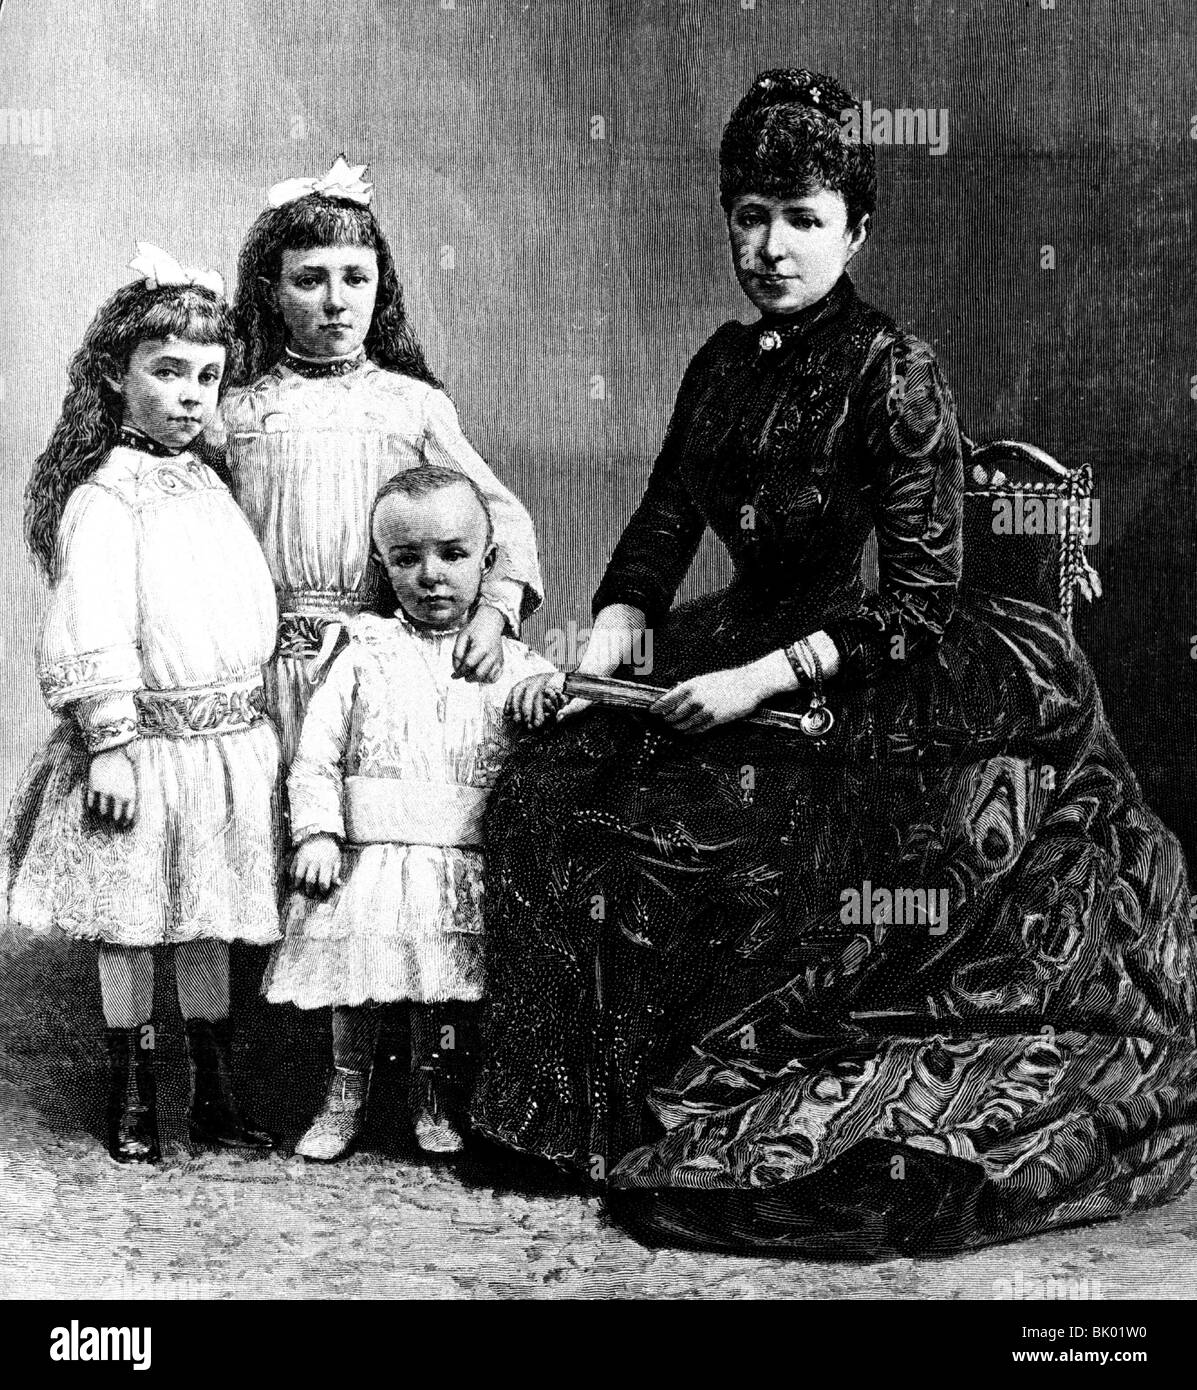 Marie Christine, 21.7.1858 - 6.2.1929, Queen consort of Spain 1885 - 1902, group picture, with her children Maria de las Mercedes, Maria Theresia & Alfons, wood engraving after drawing by R. Taylor, circa 1890, Stock Photo